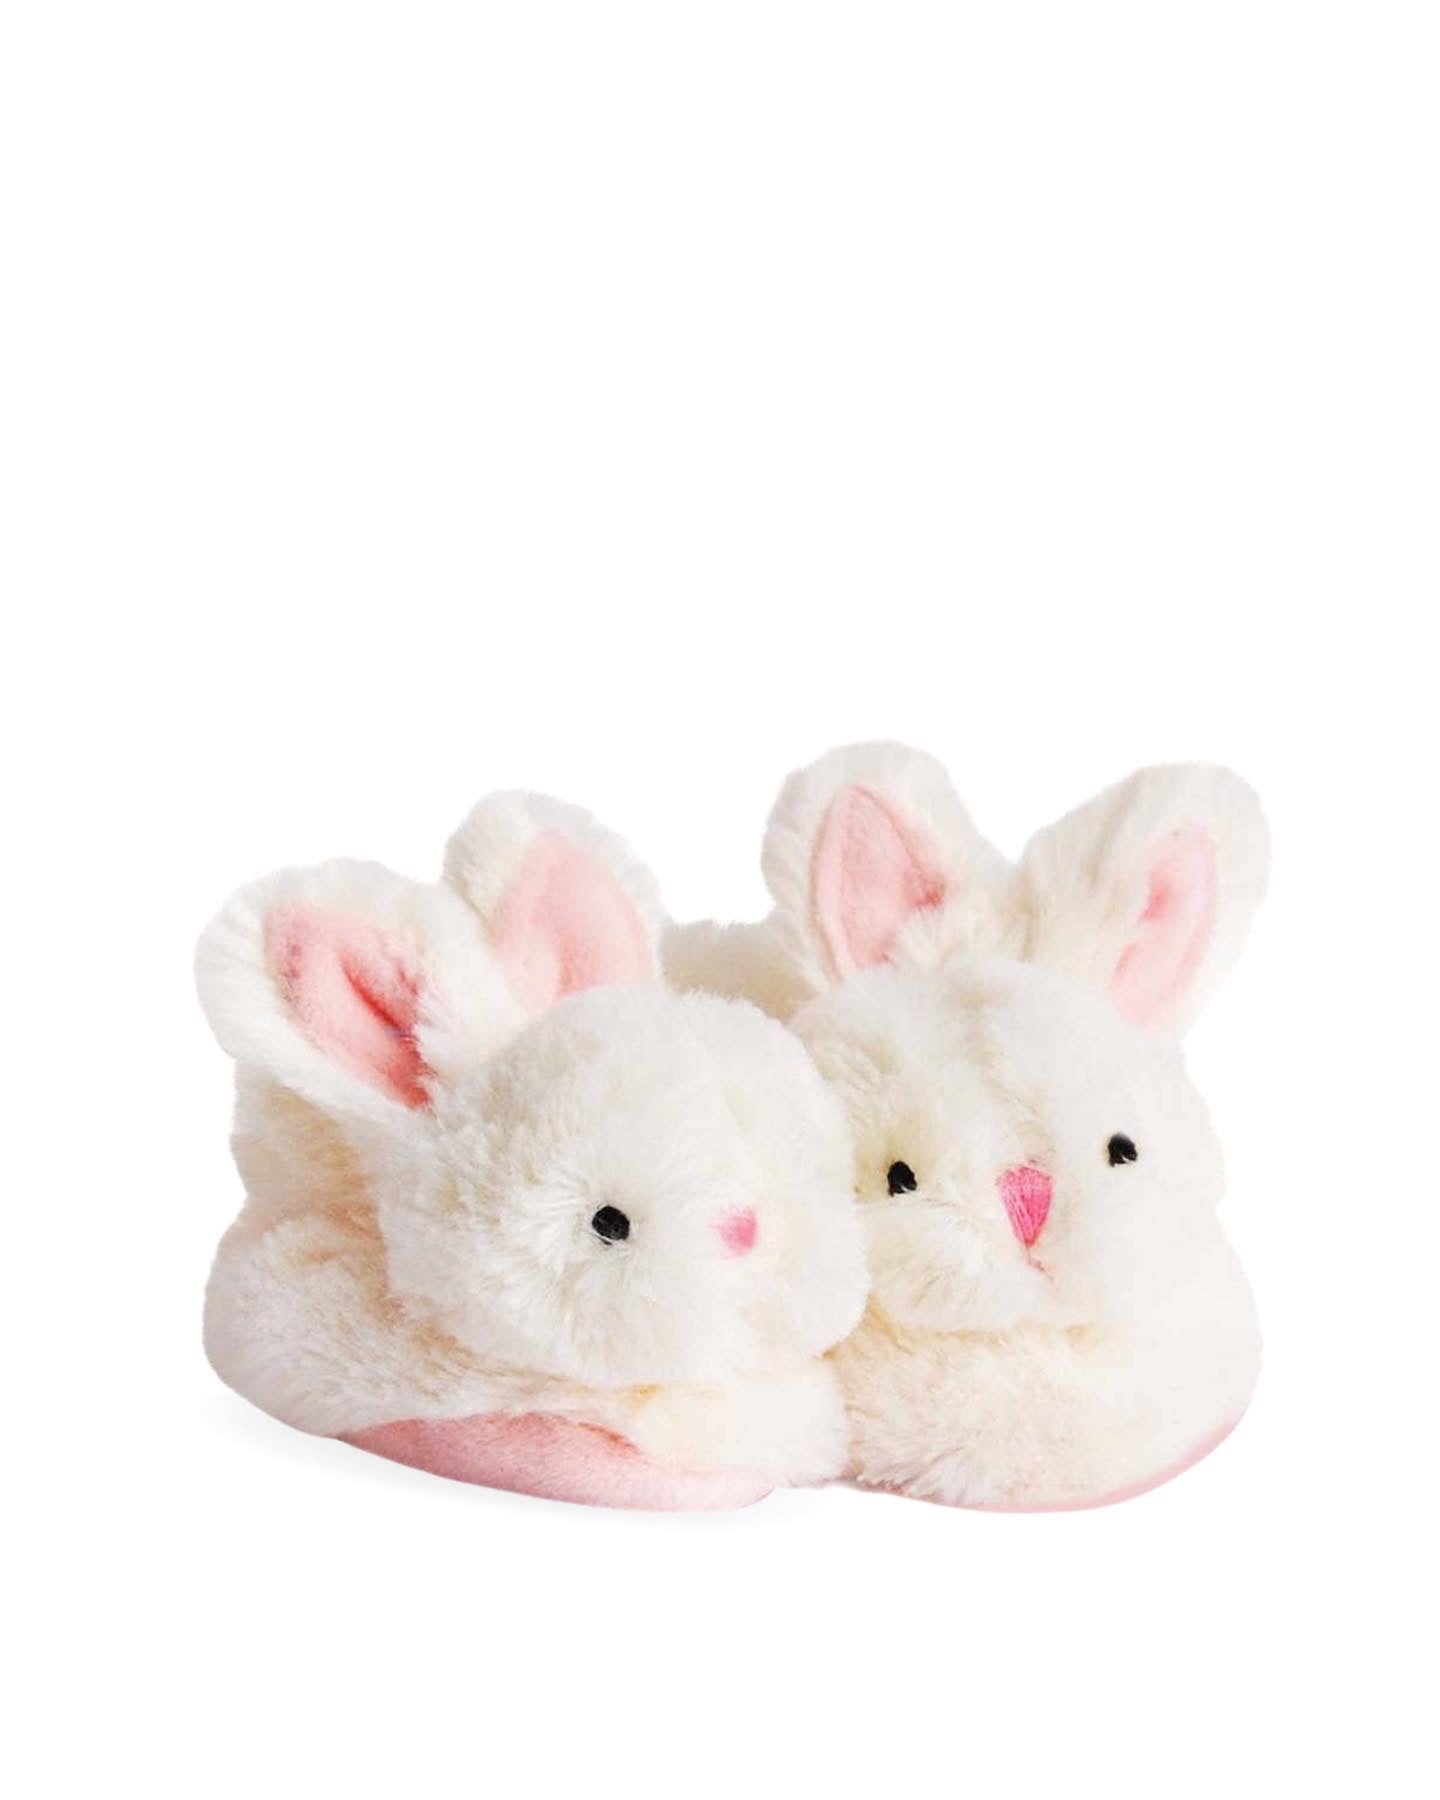 Pink Bunny Slippers - Shop on Pinterest